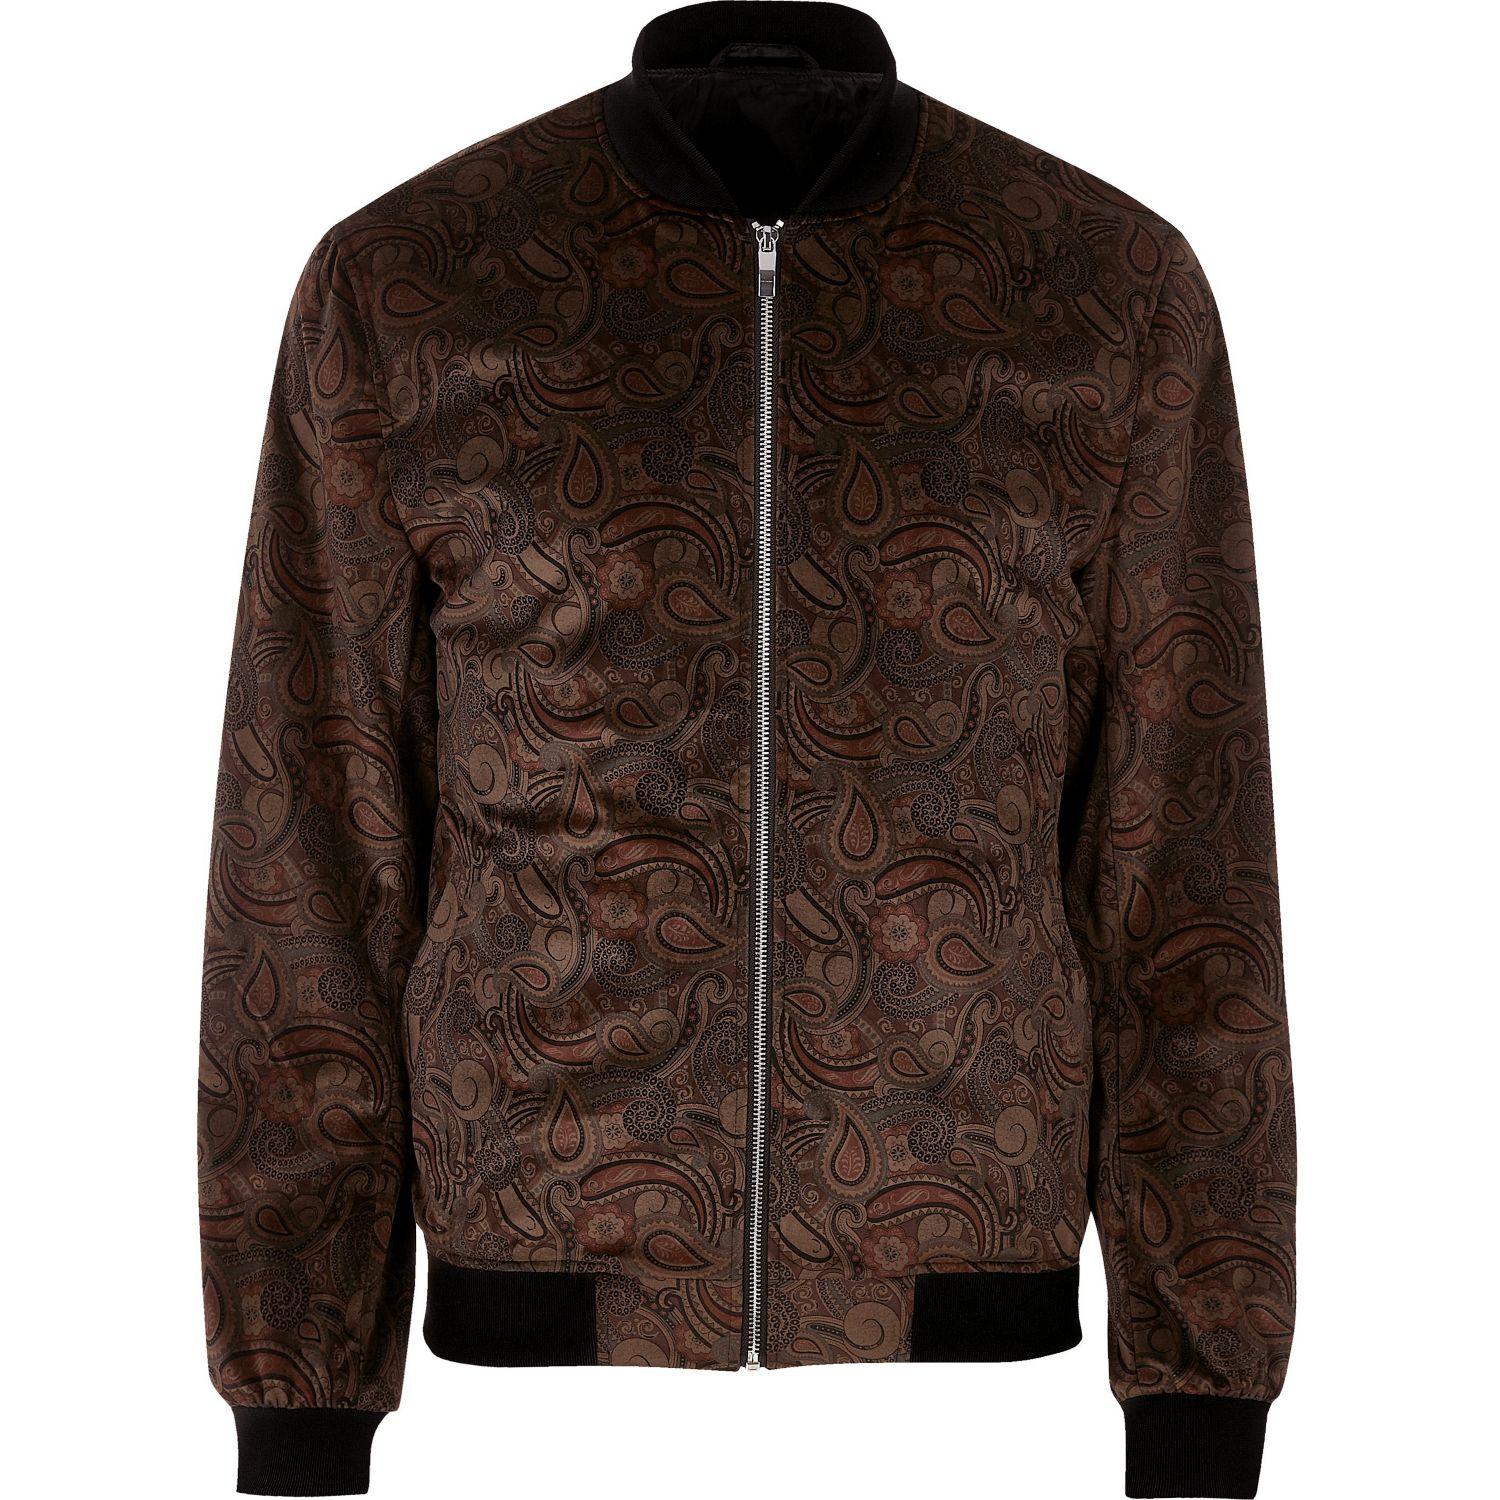 River Island Synthetic Brown Paisley Print Bomber Jacket for Men - Lyst